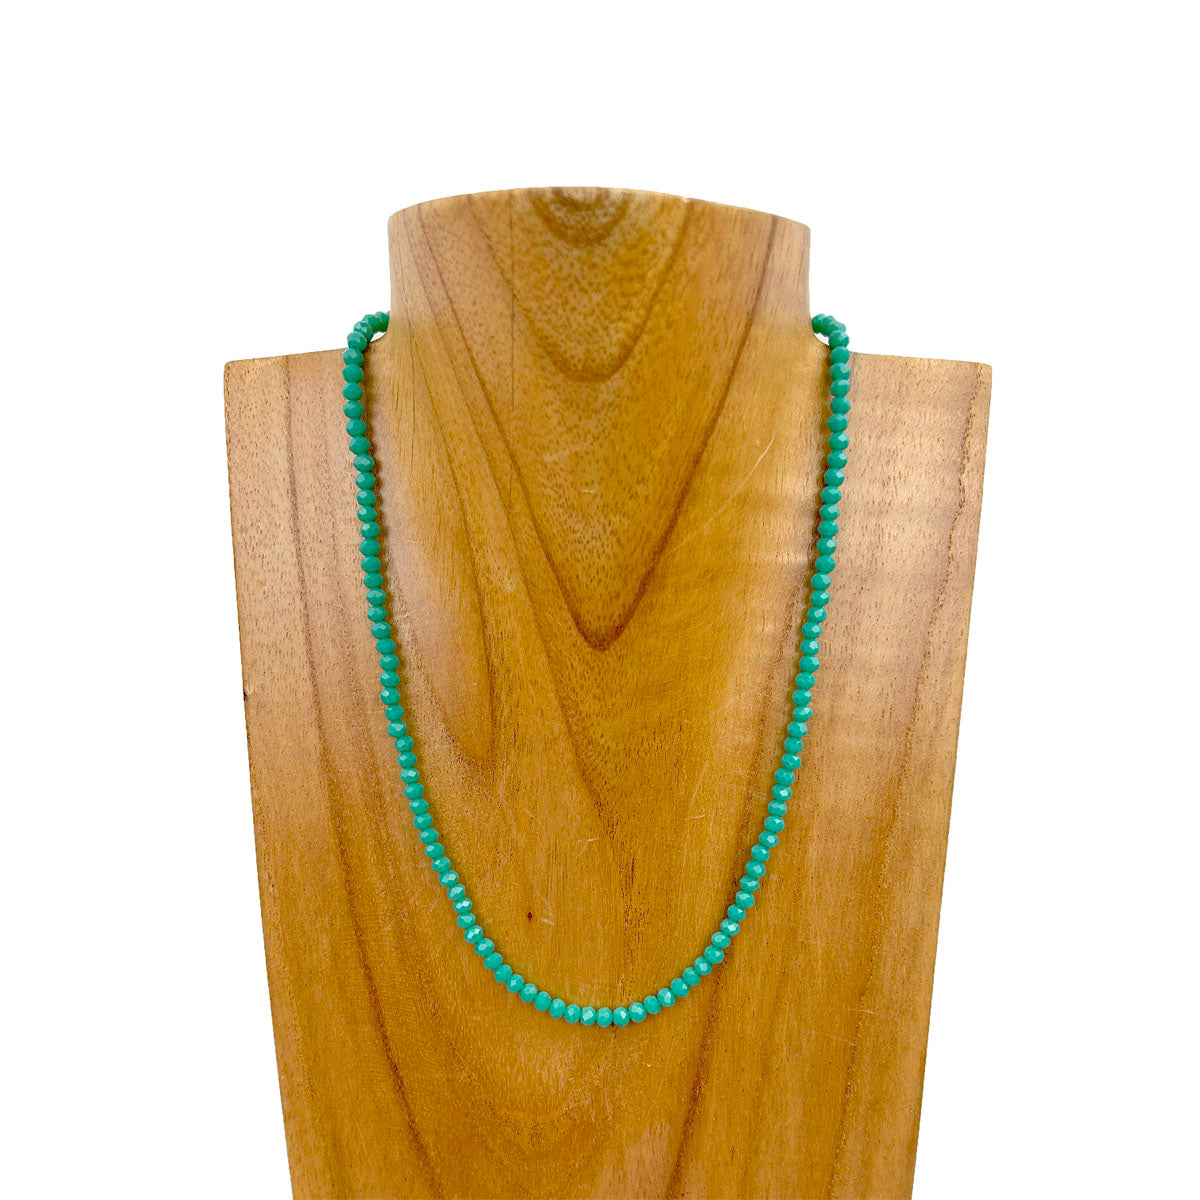 NKZ231116-05                 16 inches green face cut crystal beads necklace